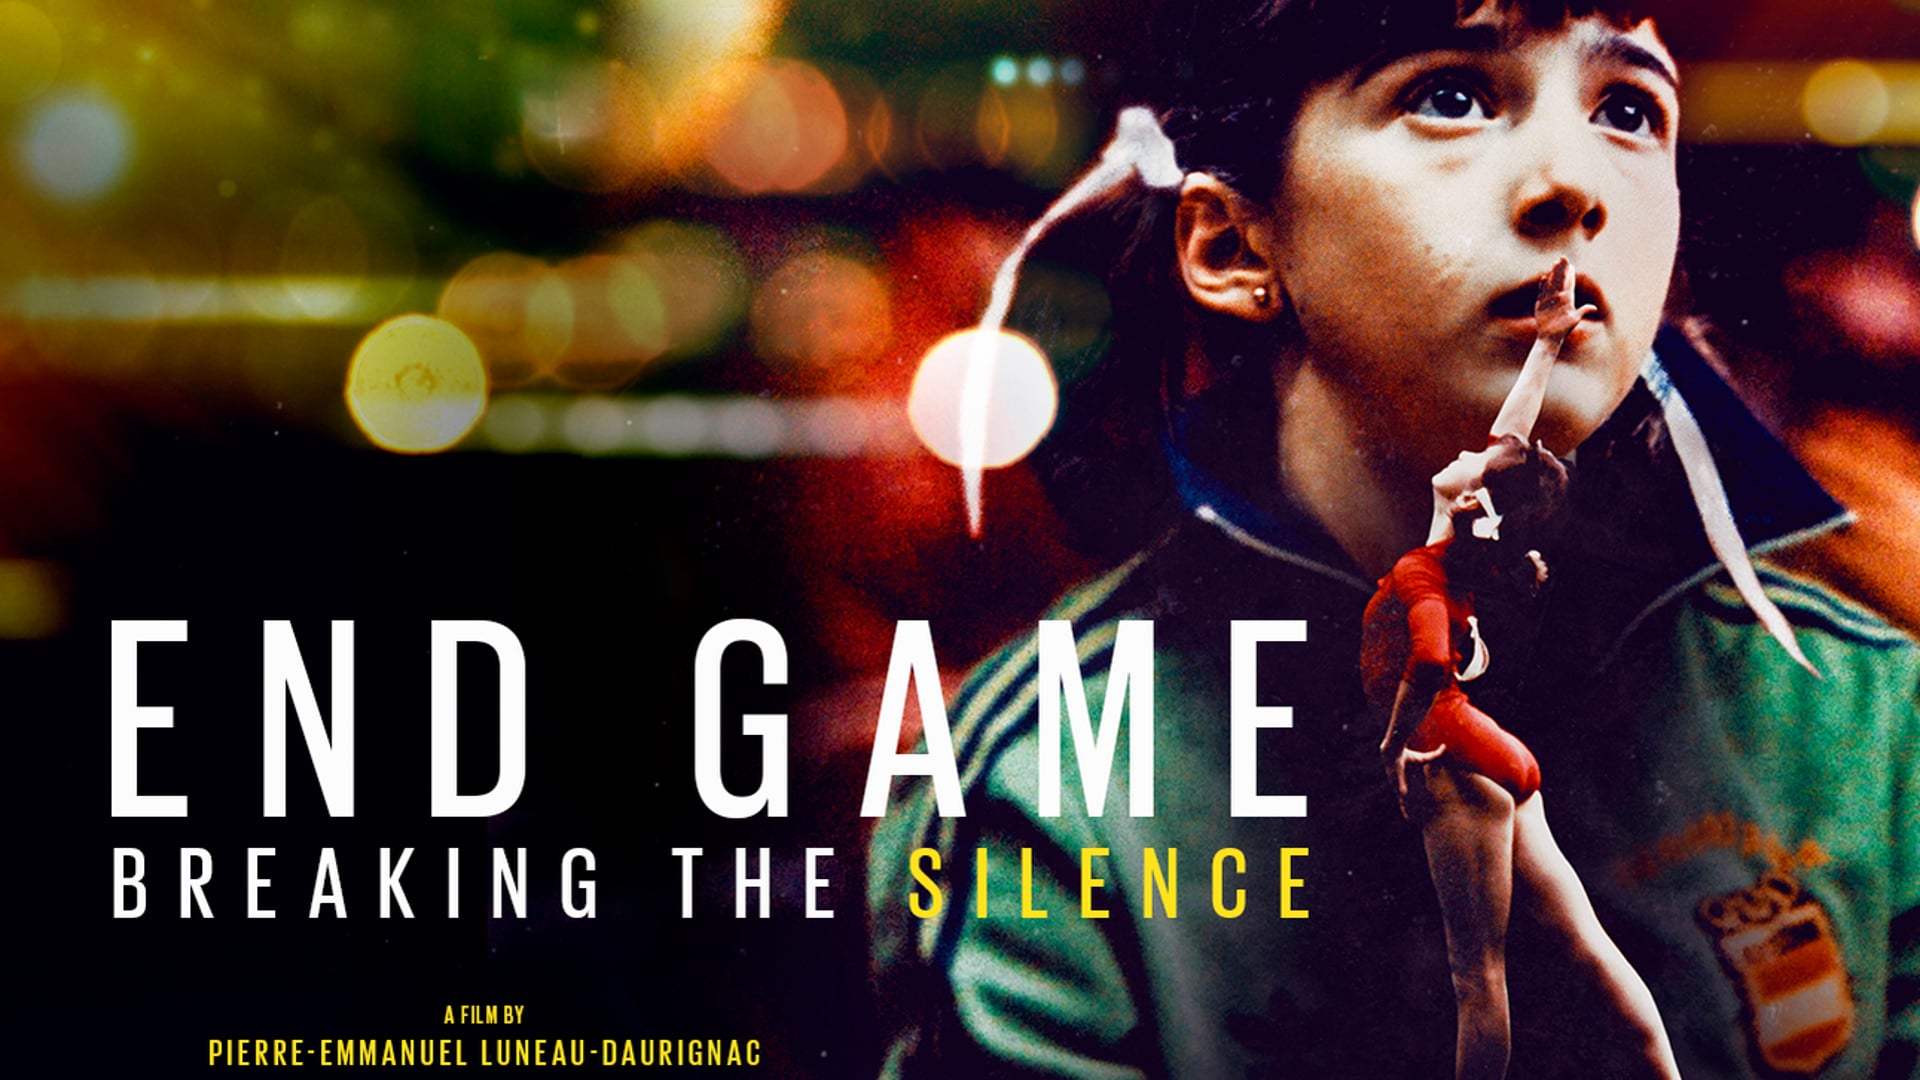 END GAME: BREAKING THE SILENCE